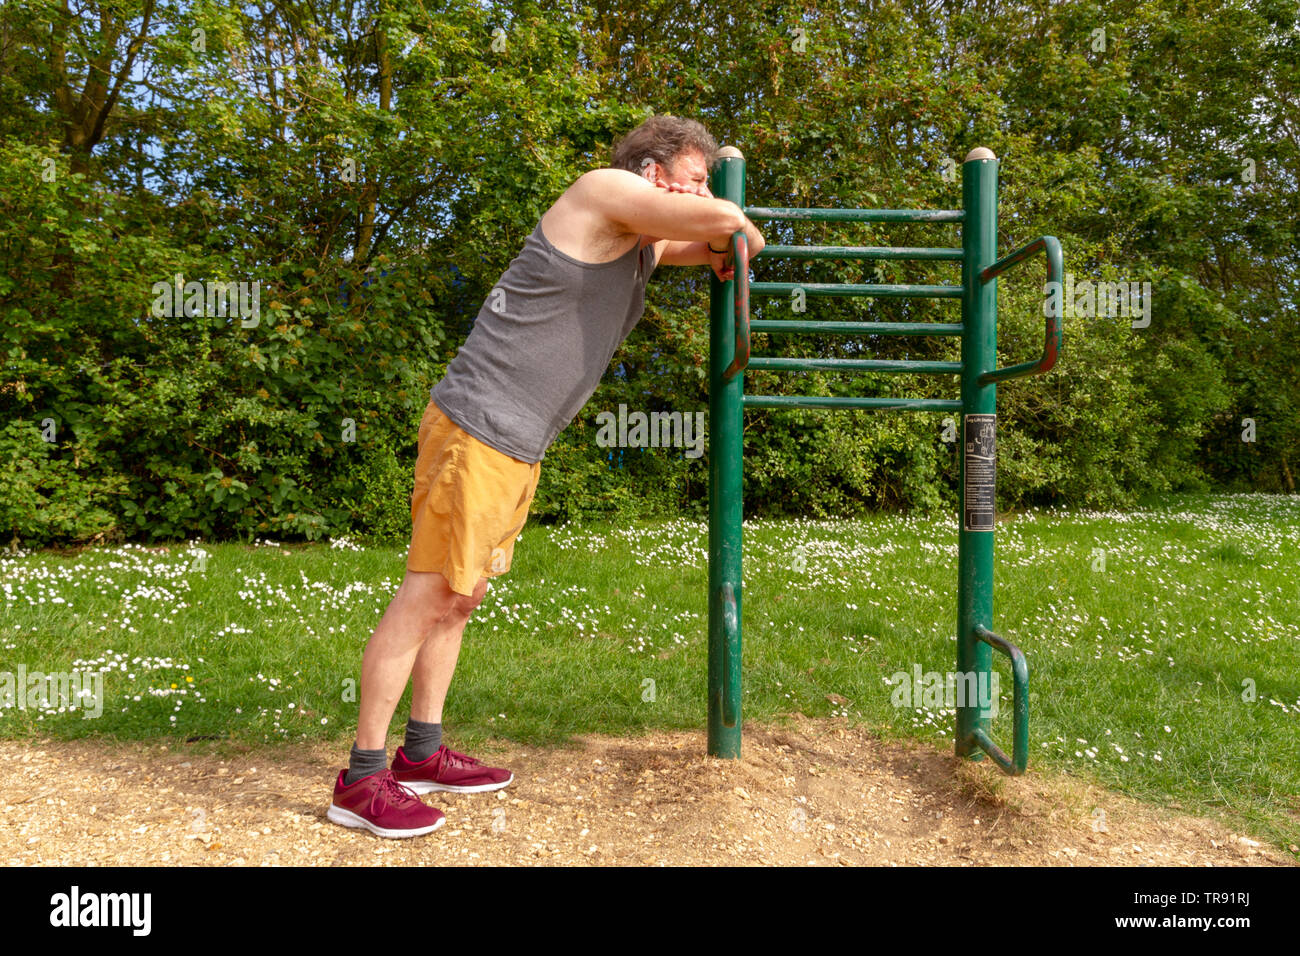 Older man taking a rest in between exercising in the outdoor gym. Healthy outdoors lifestyle concept. Stock Photo